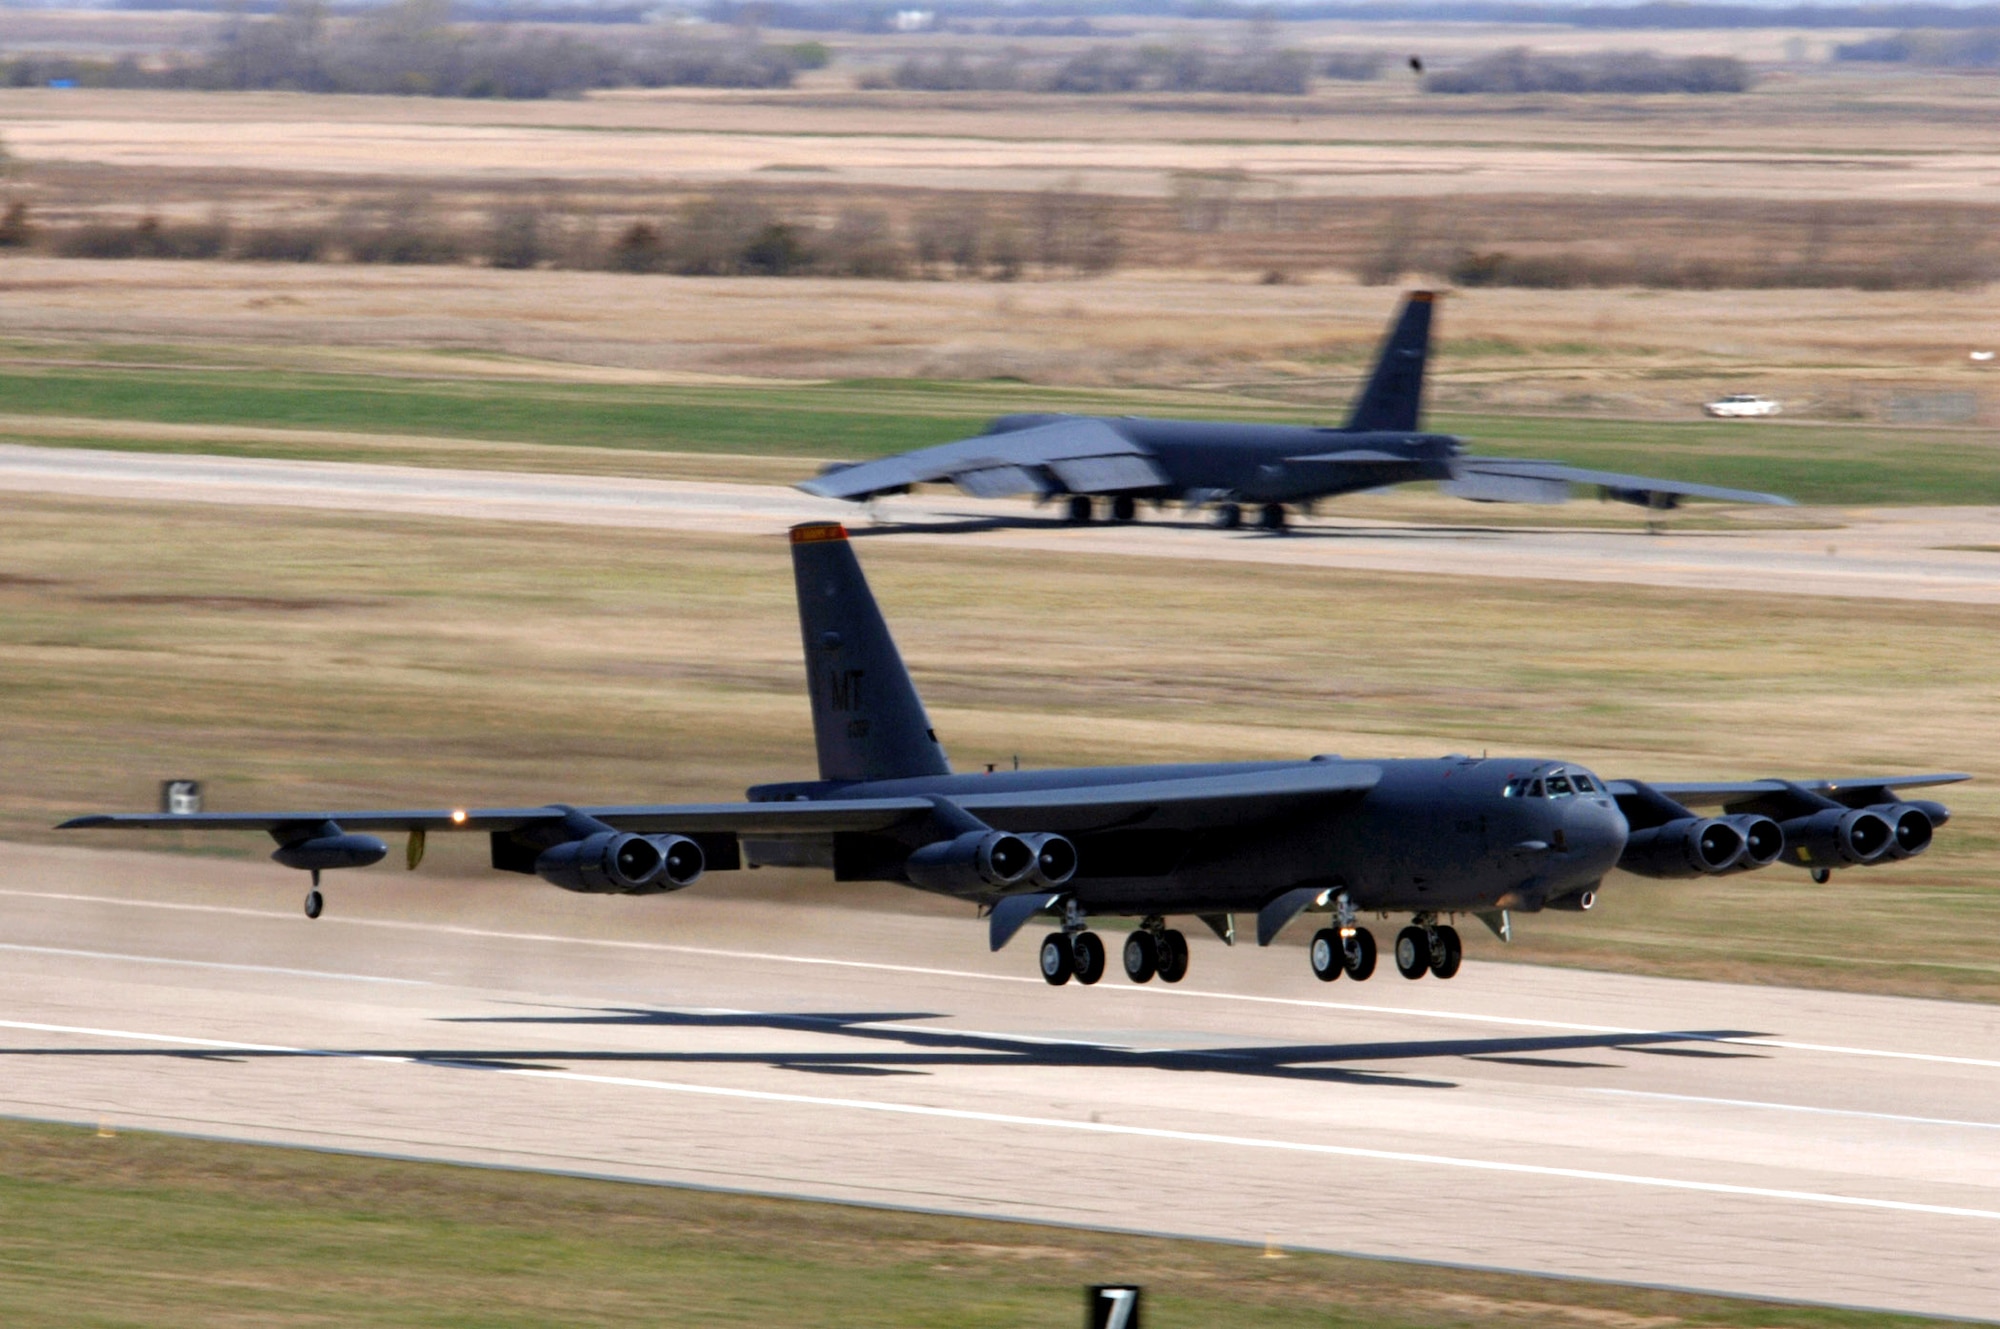 A B-52 Stratofortress powered by a mix of synthetic and JP-8 fuel is slated to take its first flight Sept. 19 from Edwards Air Force Base, Calif., bringing the Air Force one step closer to reducing its dependence on foreign fuel. 
The B-52s shown are at Minot Air Force Base, N.D. (U.S. Air Force photo/Senior Airman Stacy Moless)